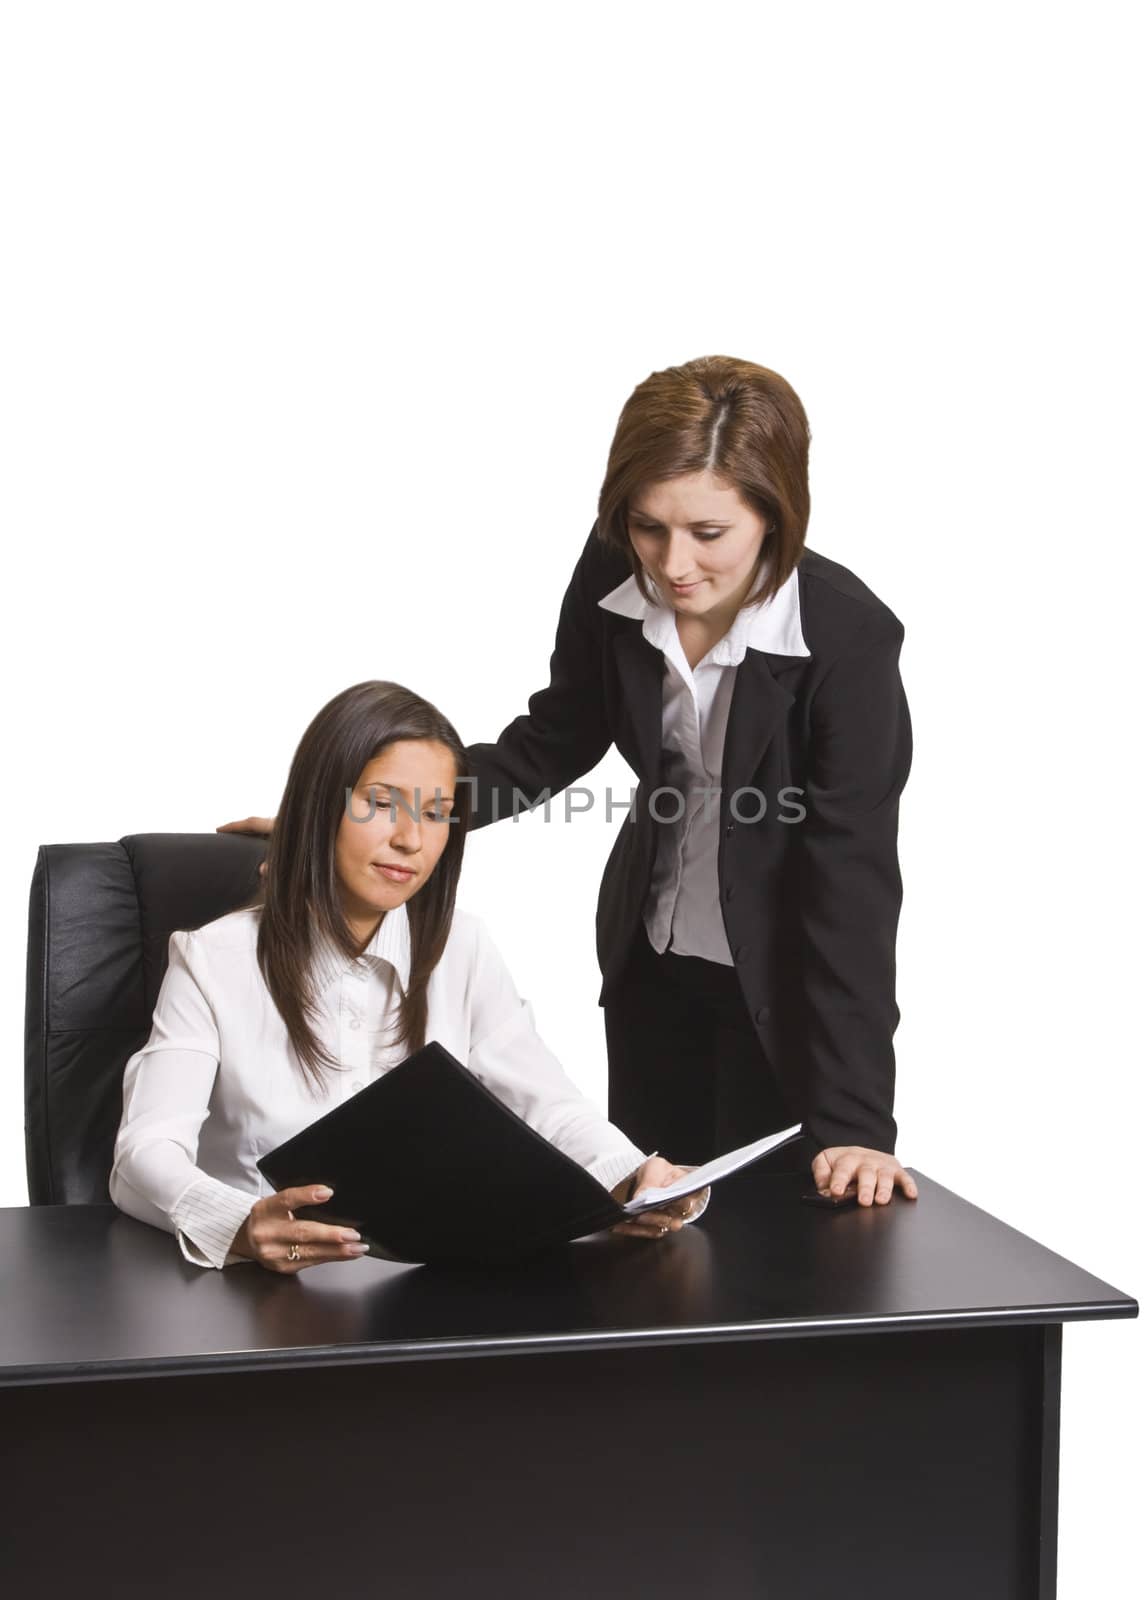 Two businesswomen reading a file in the office.